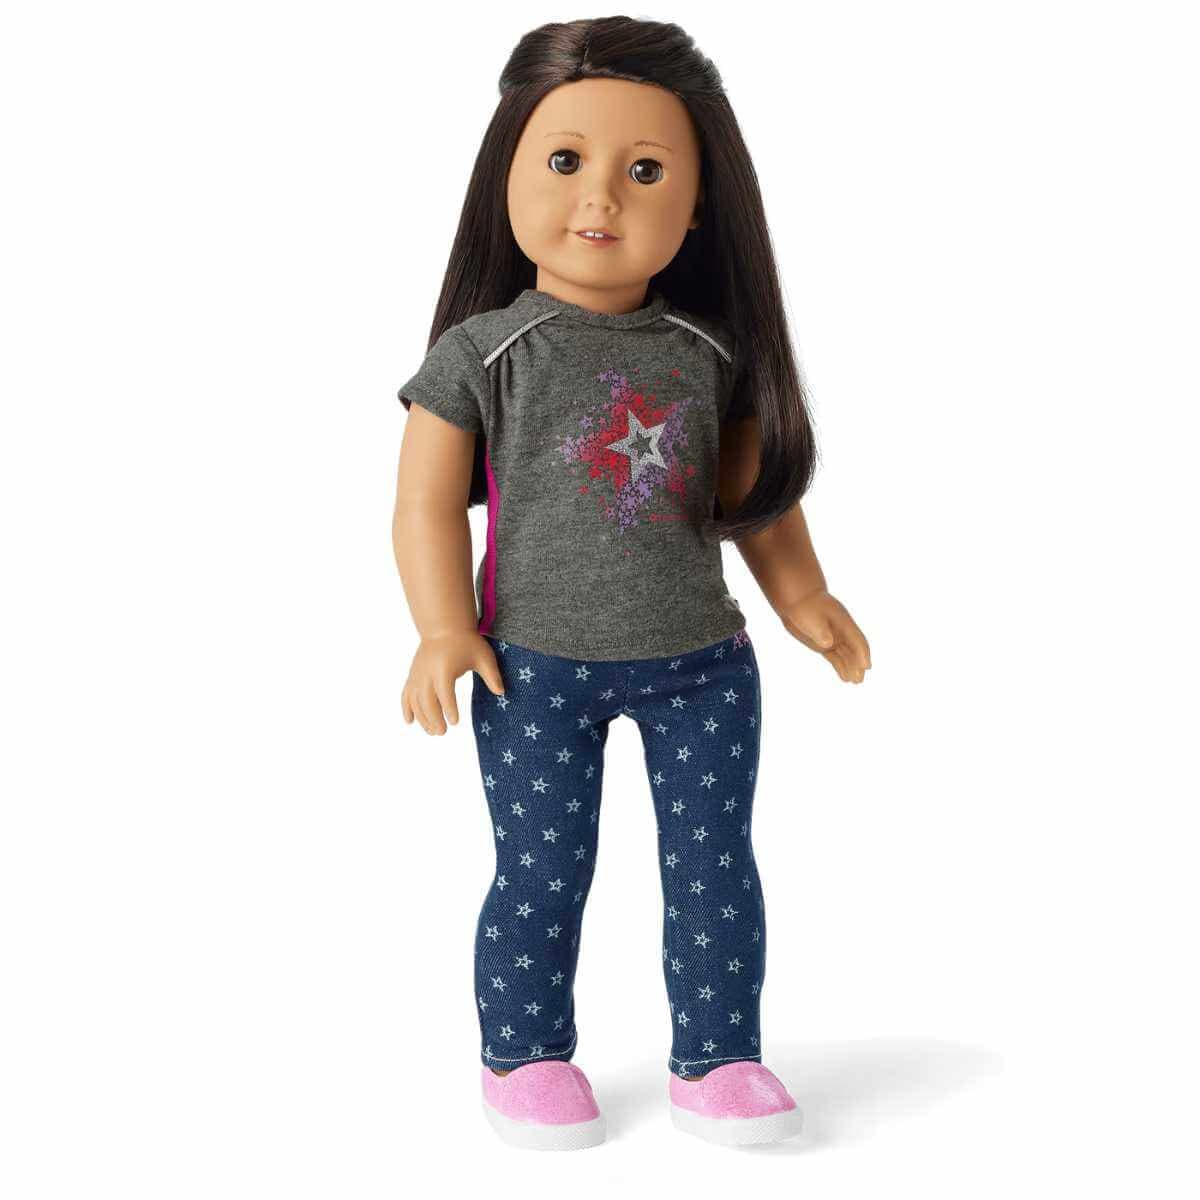 American Girl Star Bright Tee for 18-inch Dolls - Simon's Collectibles